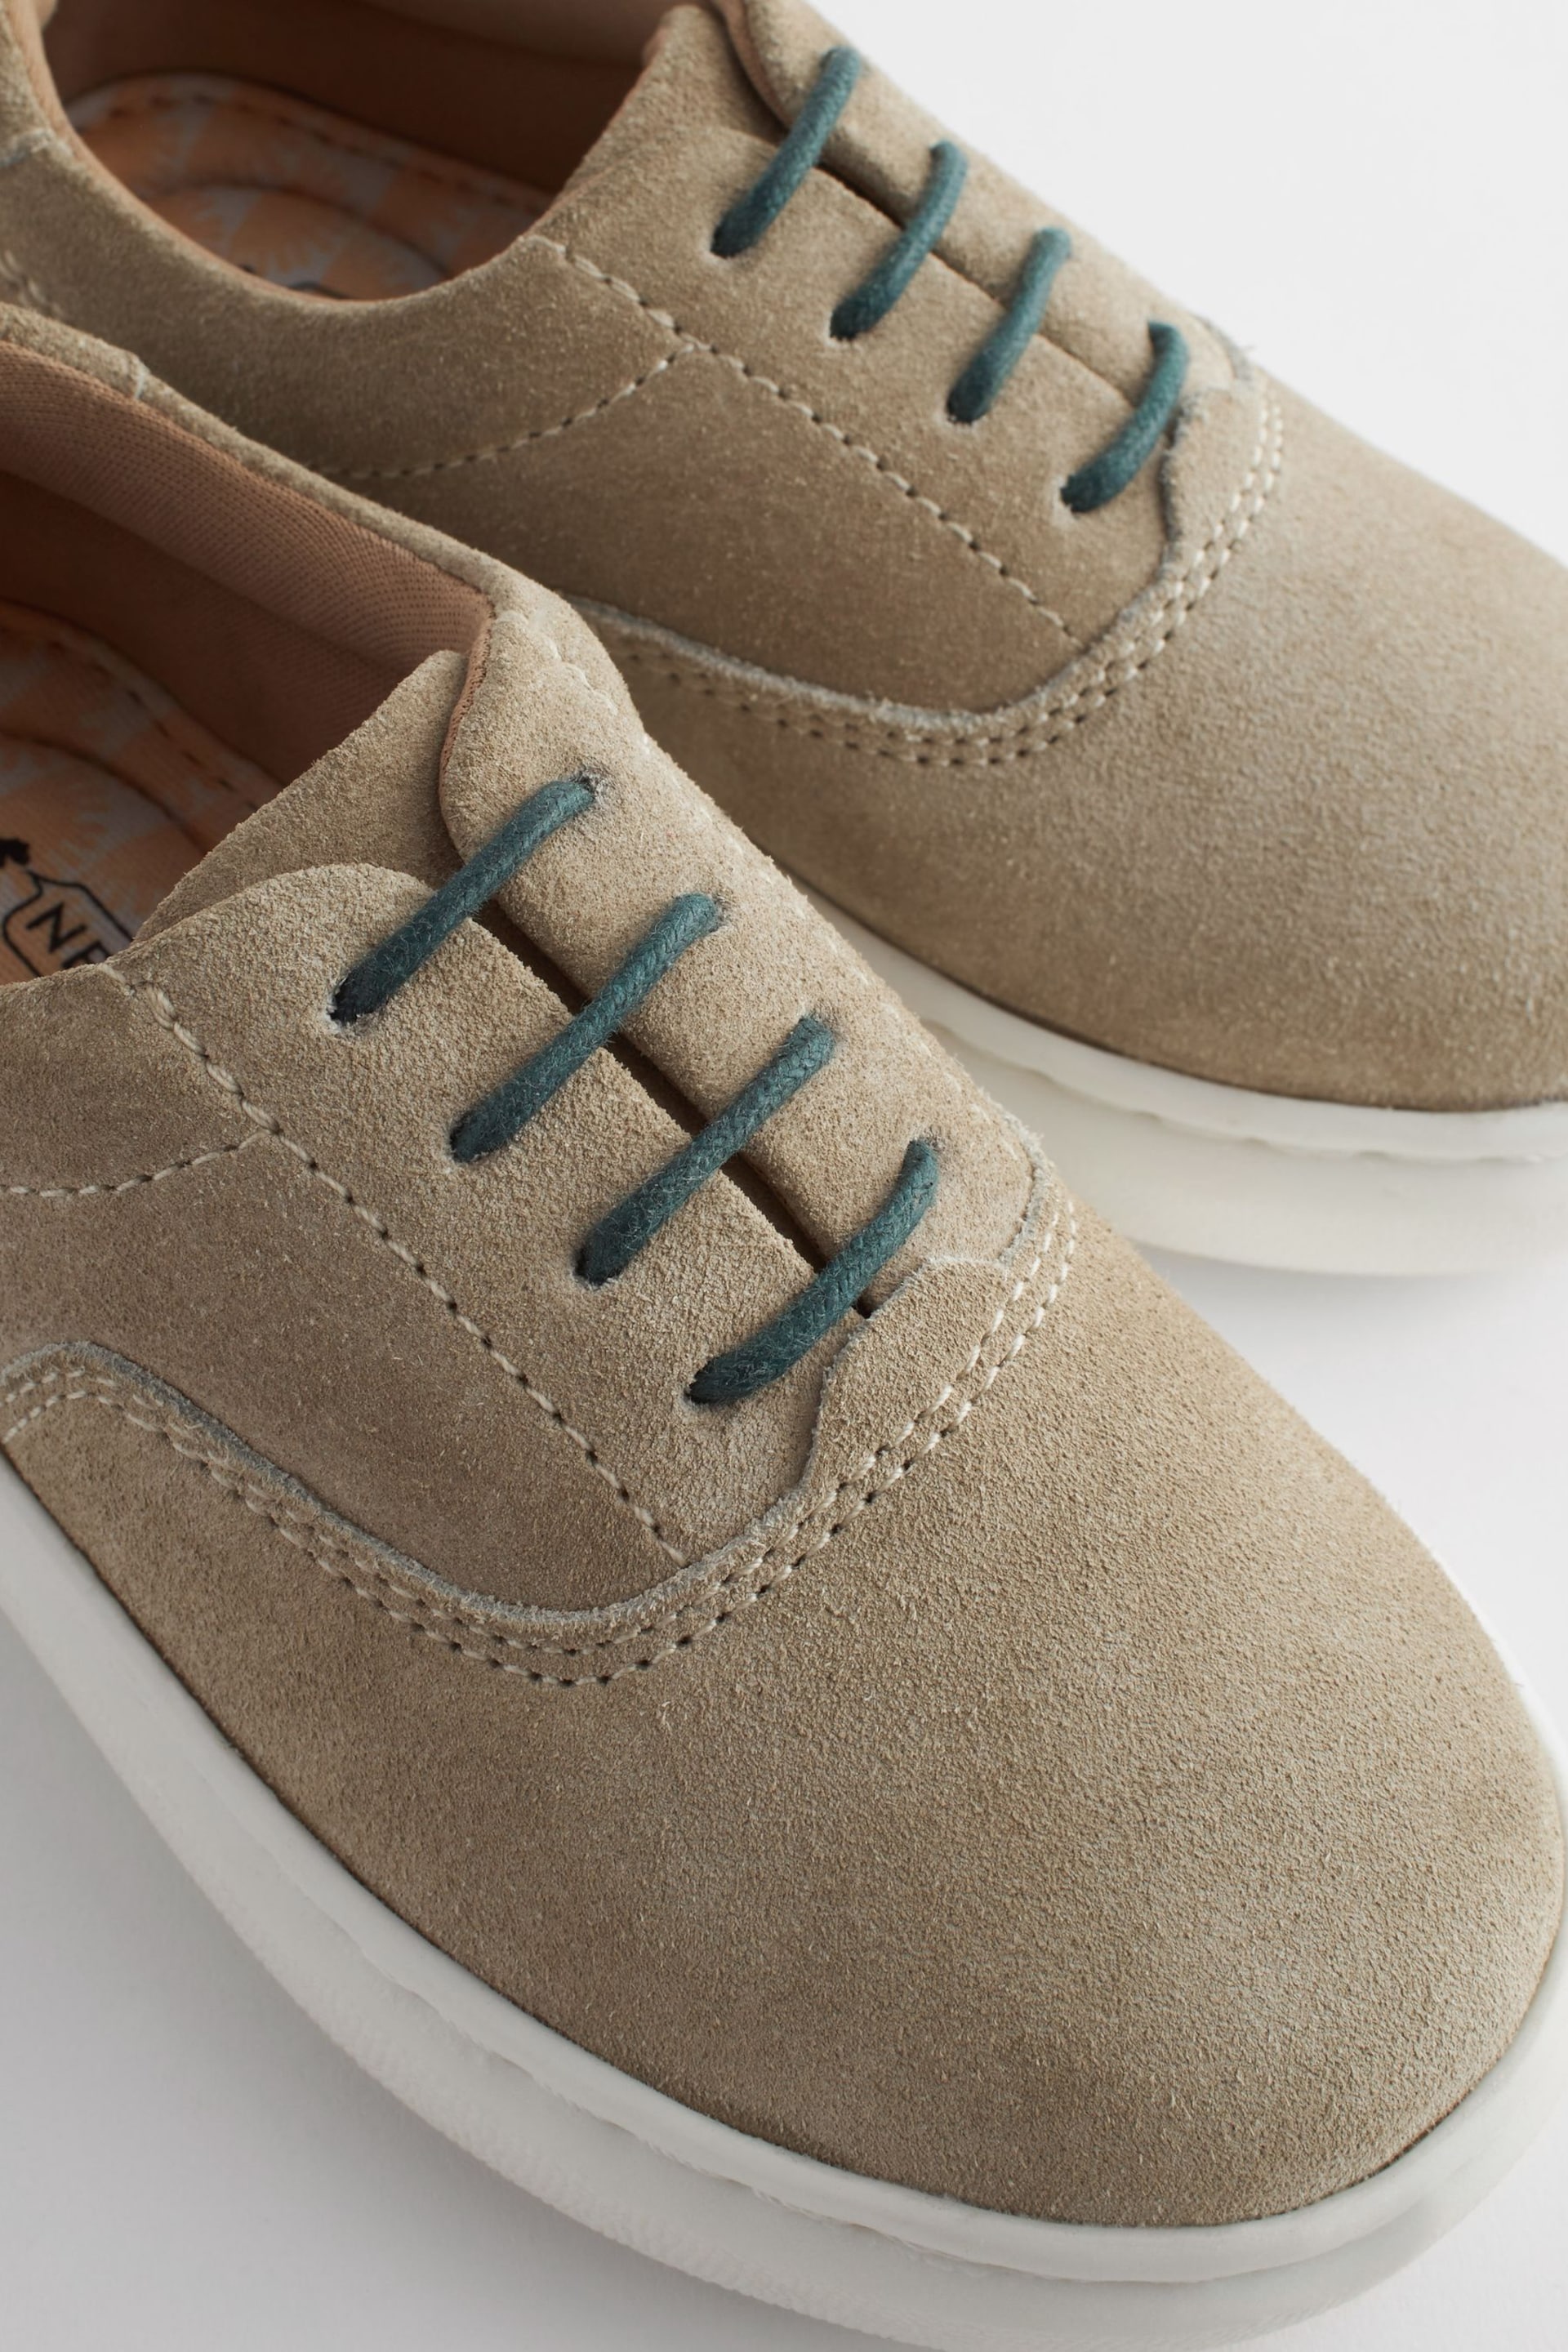 Neutral Stone Smart Leather Lace-Up Shoes - Image 5 of 8